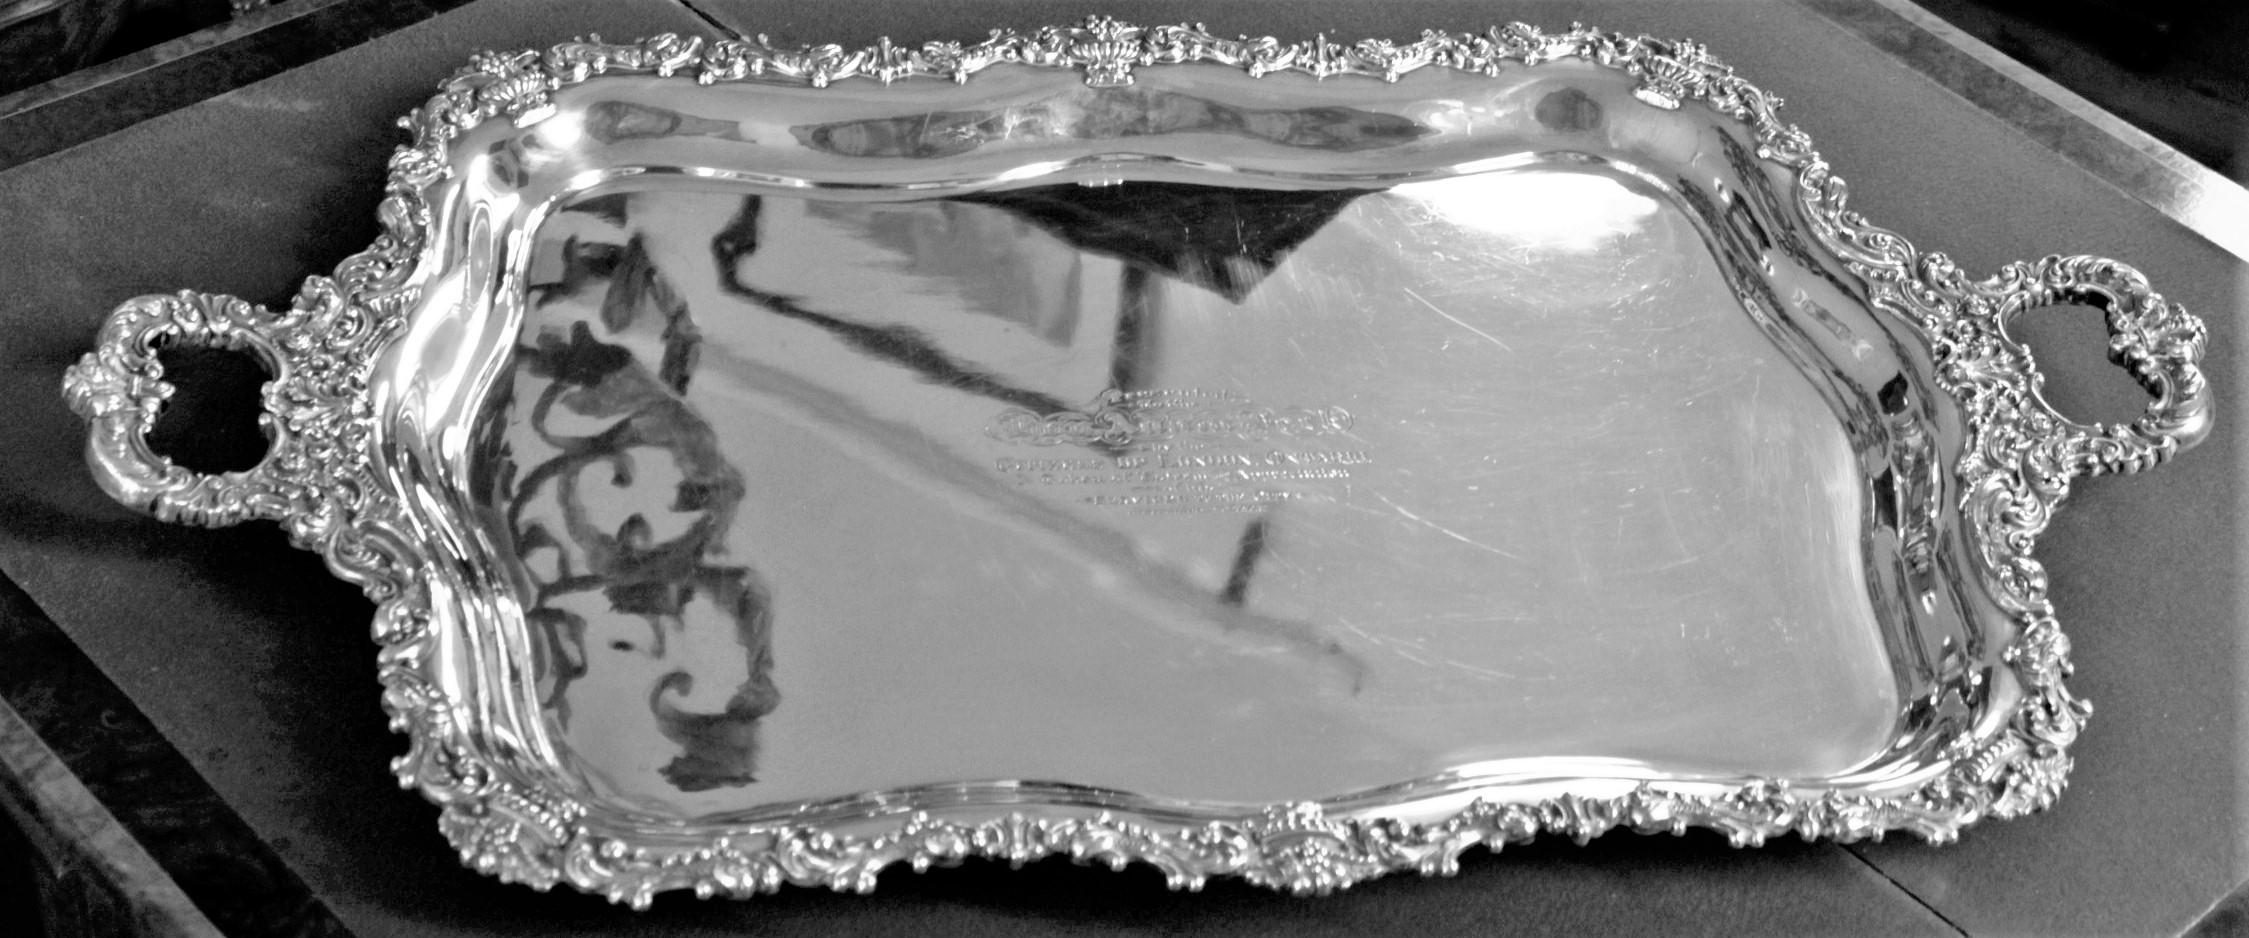 North American Important Canadian Adam Buck Large Sterling Silver Presentation Serving Tray